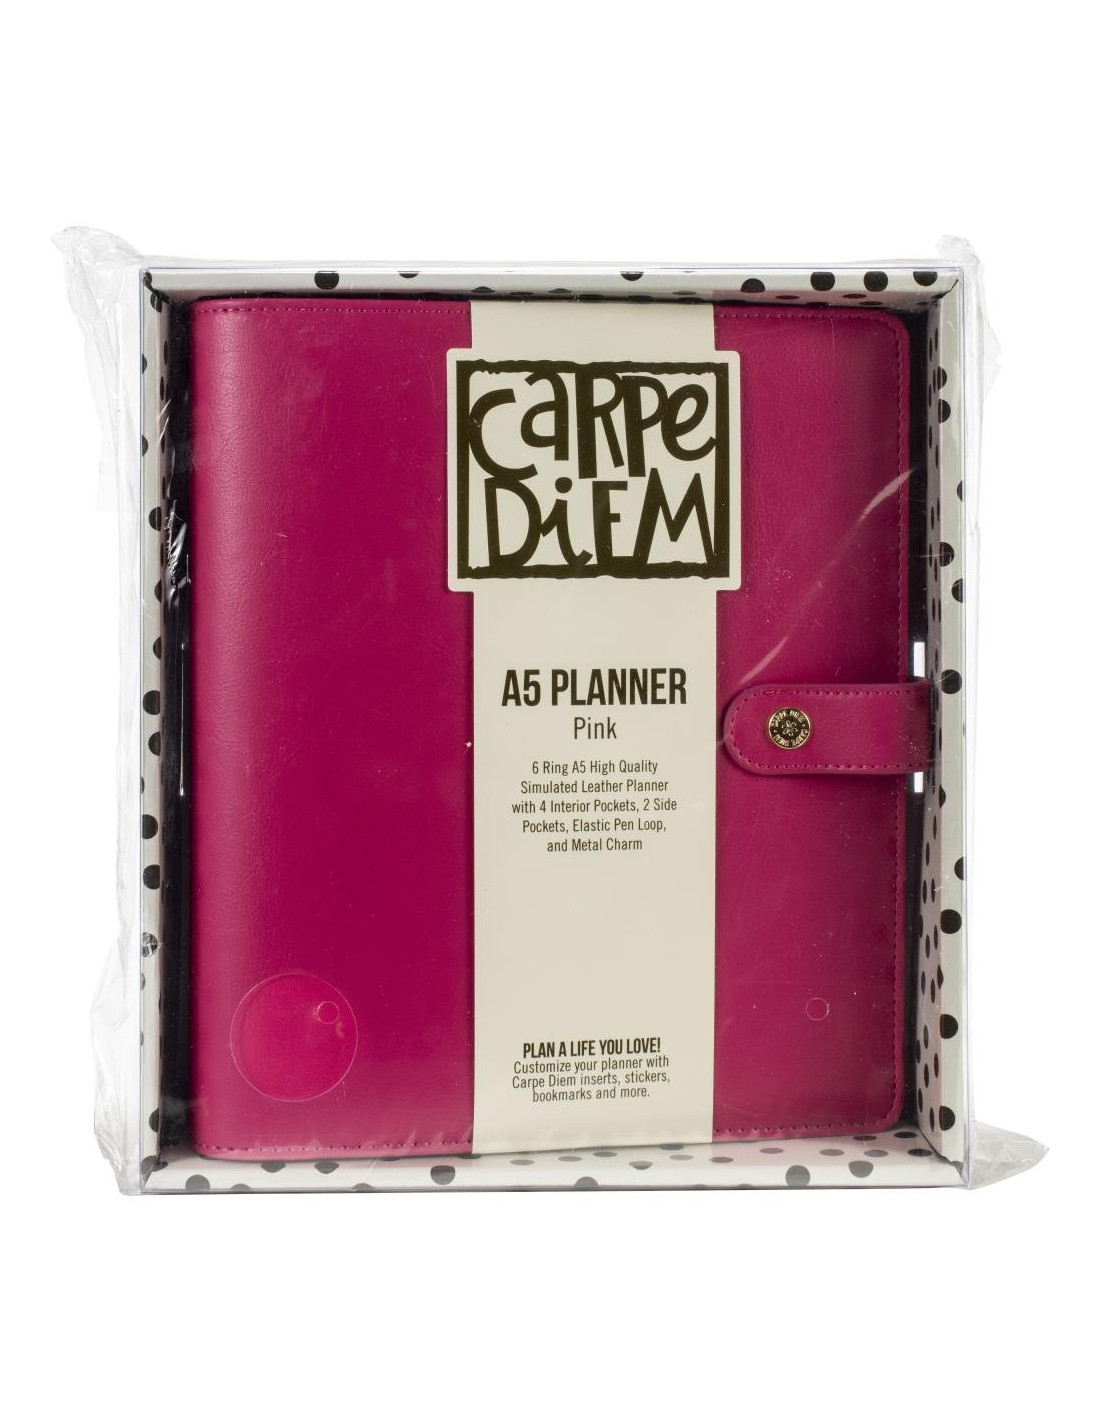 Carpe Diem Planner Ballerina Pink Boxed Set, A5, 6 Ring Simulated Leather  W/ 4 Interior Pockets, 2 Side Pockets, Elastic Pen Loop, & Charm 